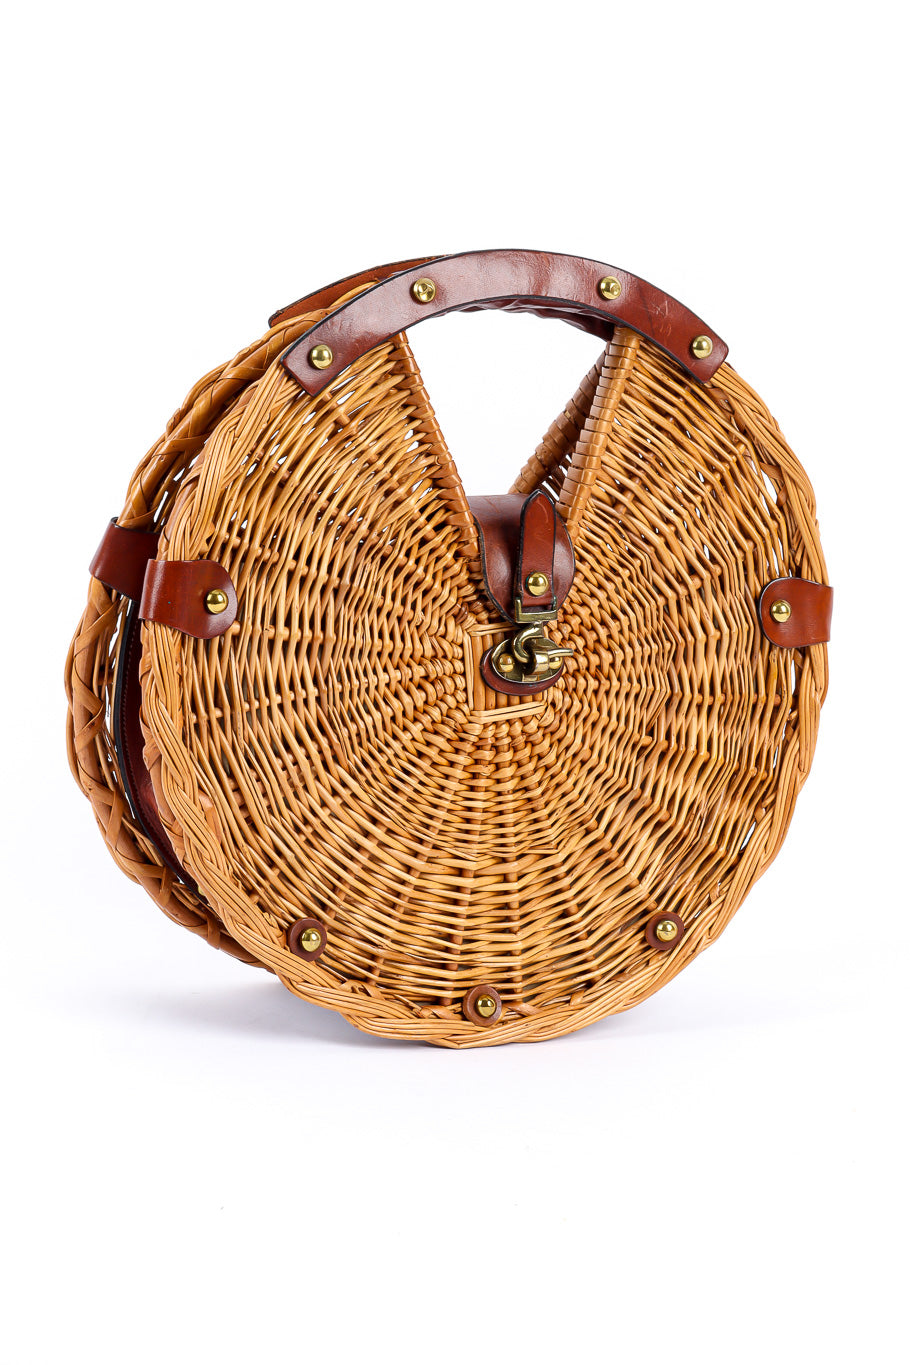 Etienne Aigner rounded wicker purse product shot @recessla 